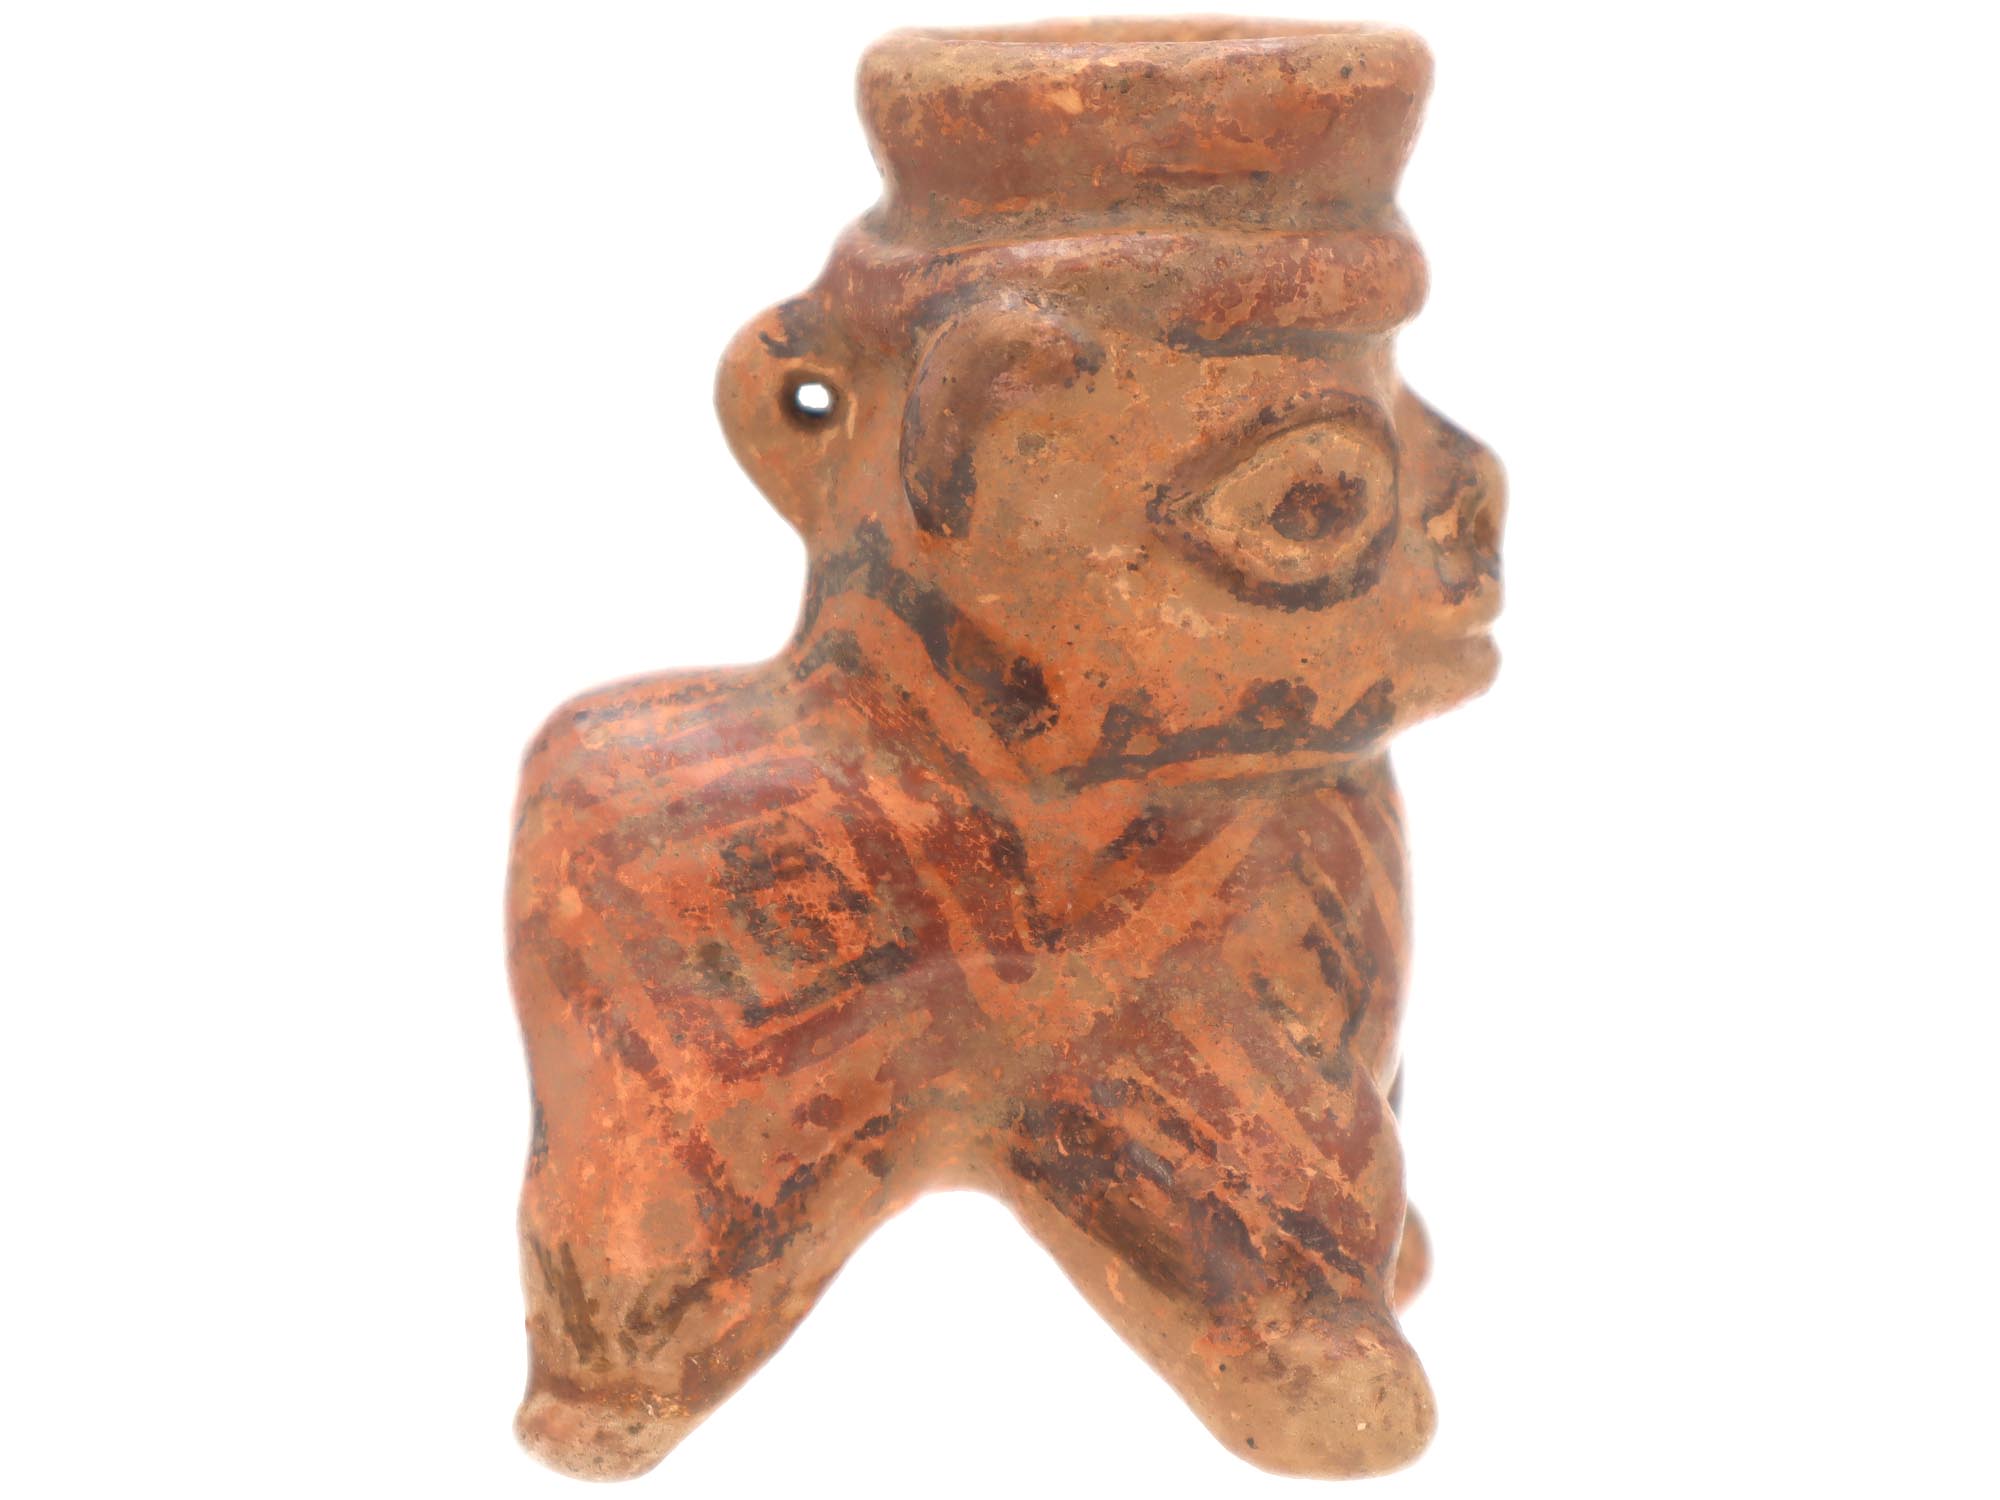 PRE COLUMBIAN COSTA RICAN MANNER EFFIGY POTTERY VESSEL PIC-6